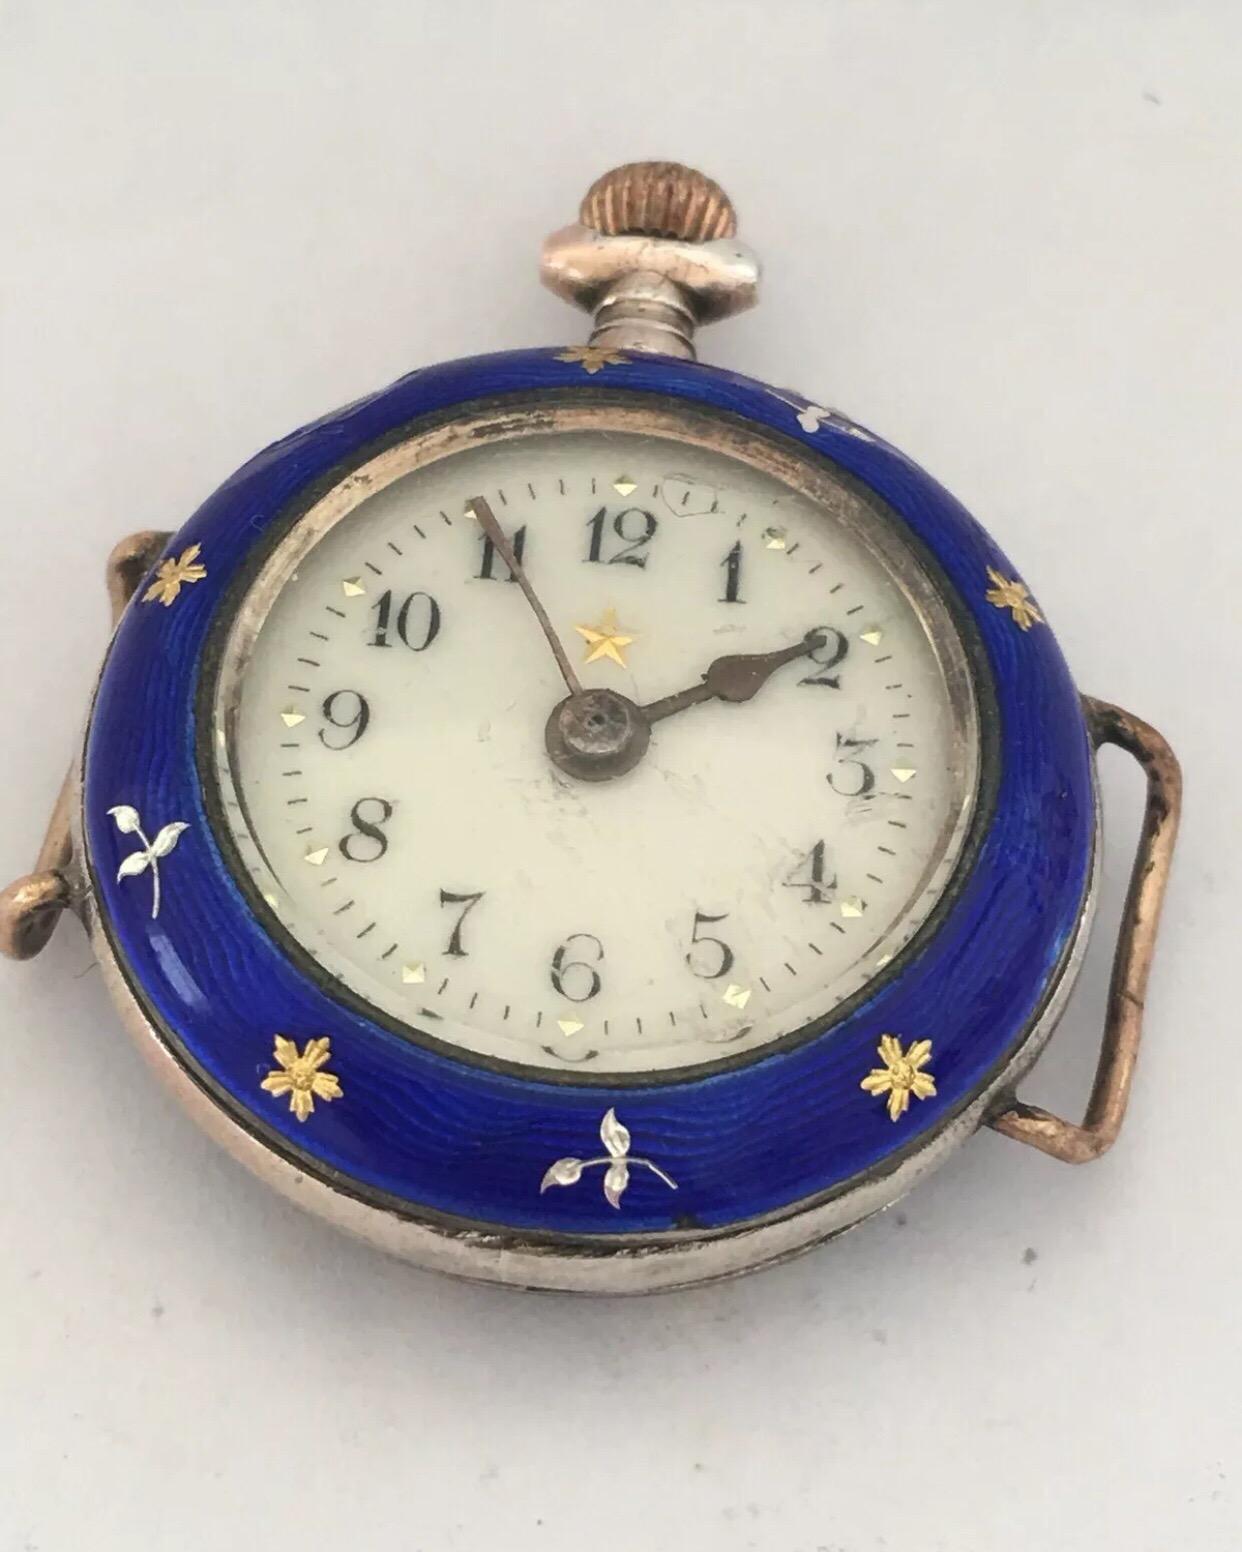 
Antique Silver Enamel Trench Watch.

This watch is working and ticking well. Visible tiny chipped on enamel at the side case as shown on photos. It needs a strap to be able to wear it. Please study the photos carefully as form part of the